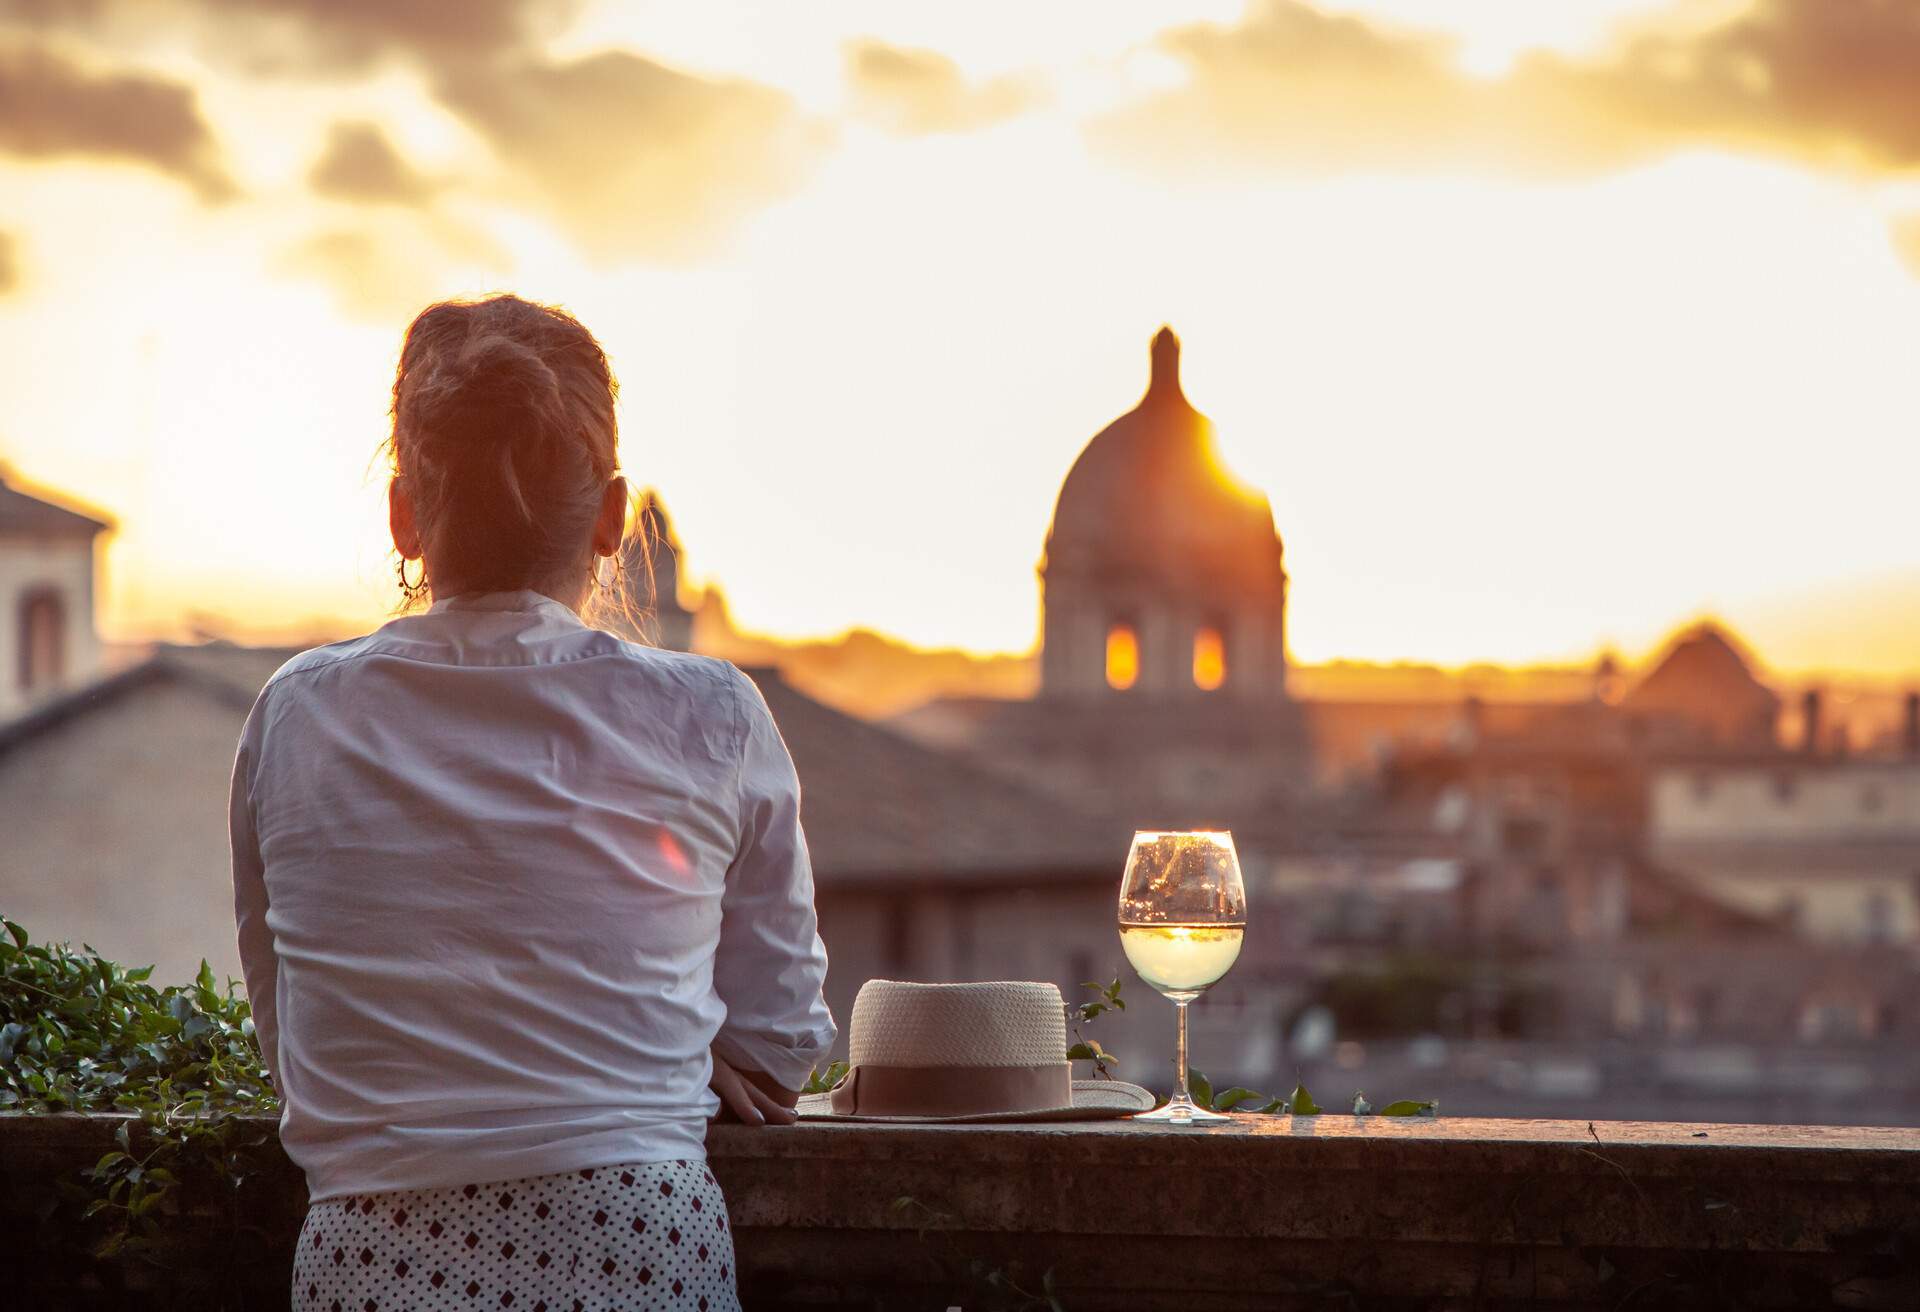 A woman leaning on a balcony railing next to a hat and a glass of wine as the sun sets over the city.